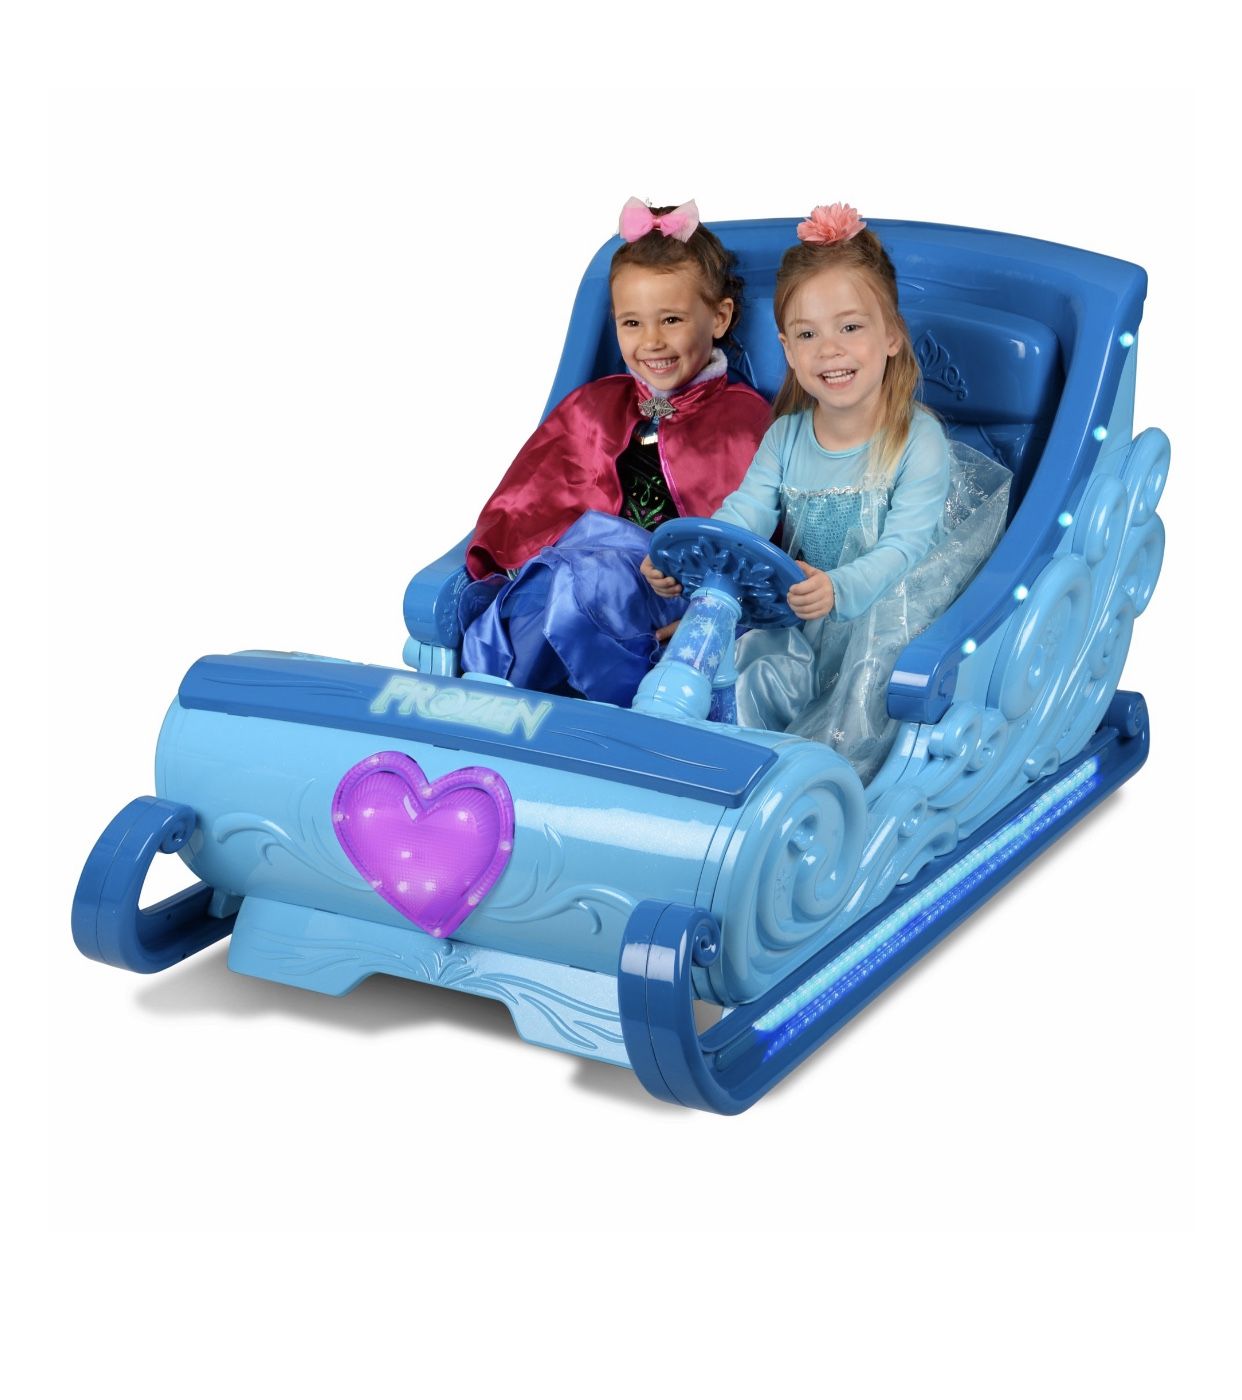 New in box Disney frozen 2 battery operated sled ride on